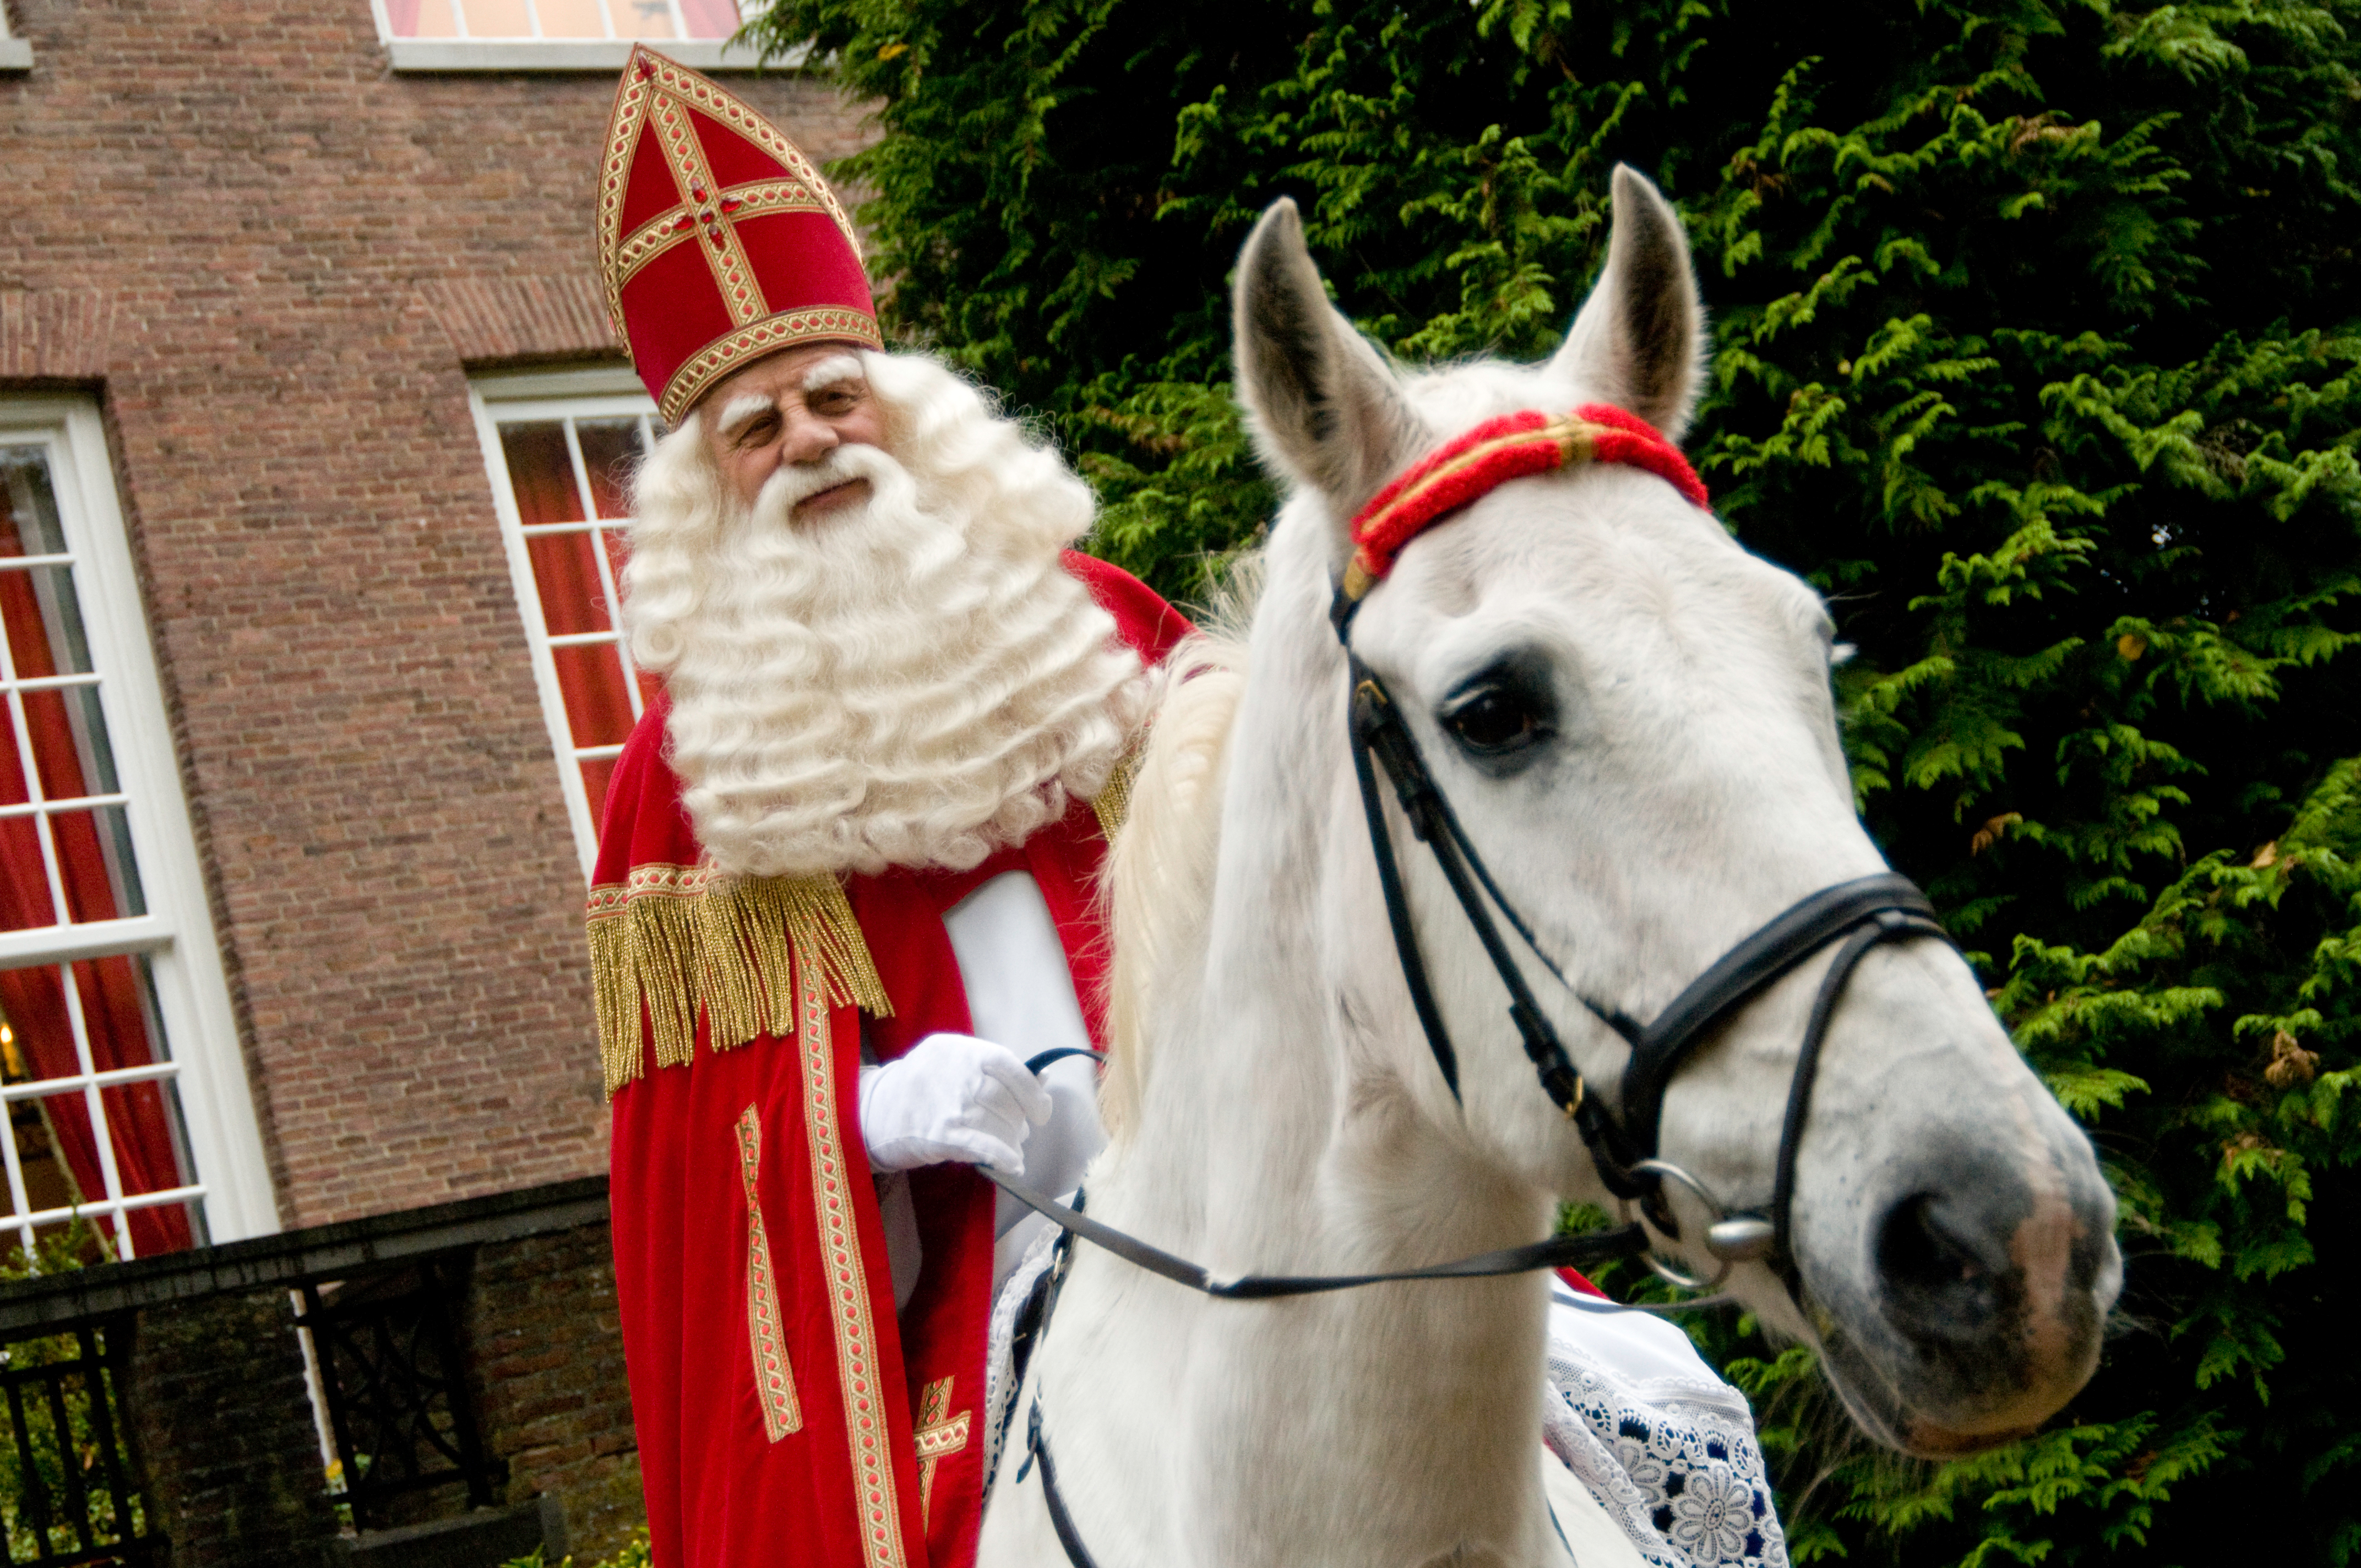 A man dressed up as Sinterklaas riding a white horse and waving to a crowd.